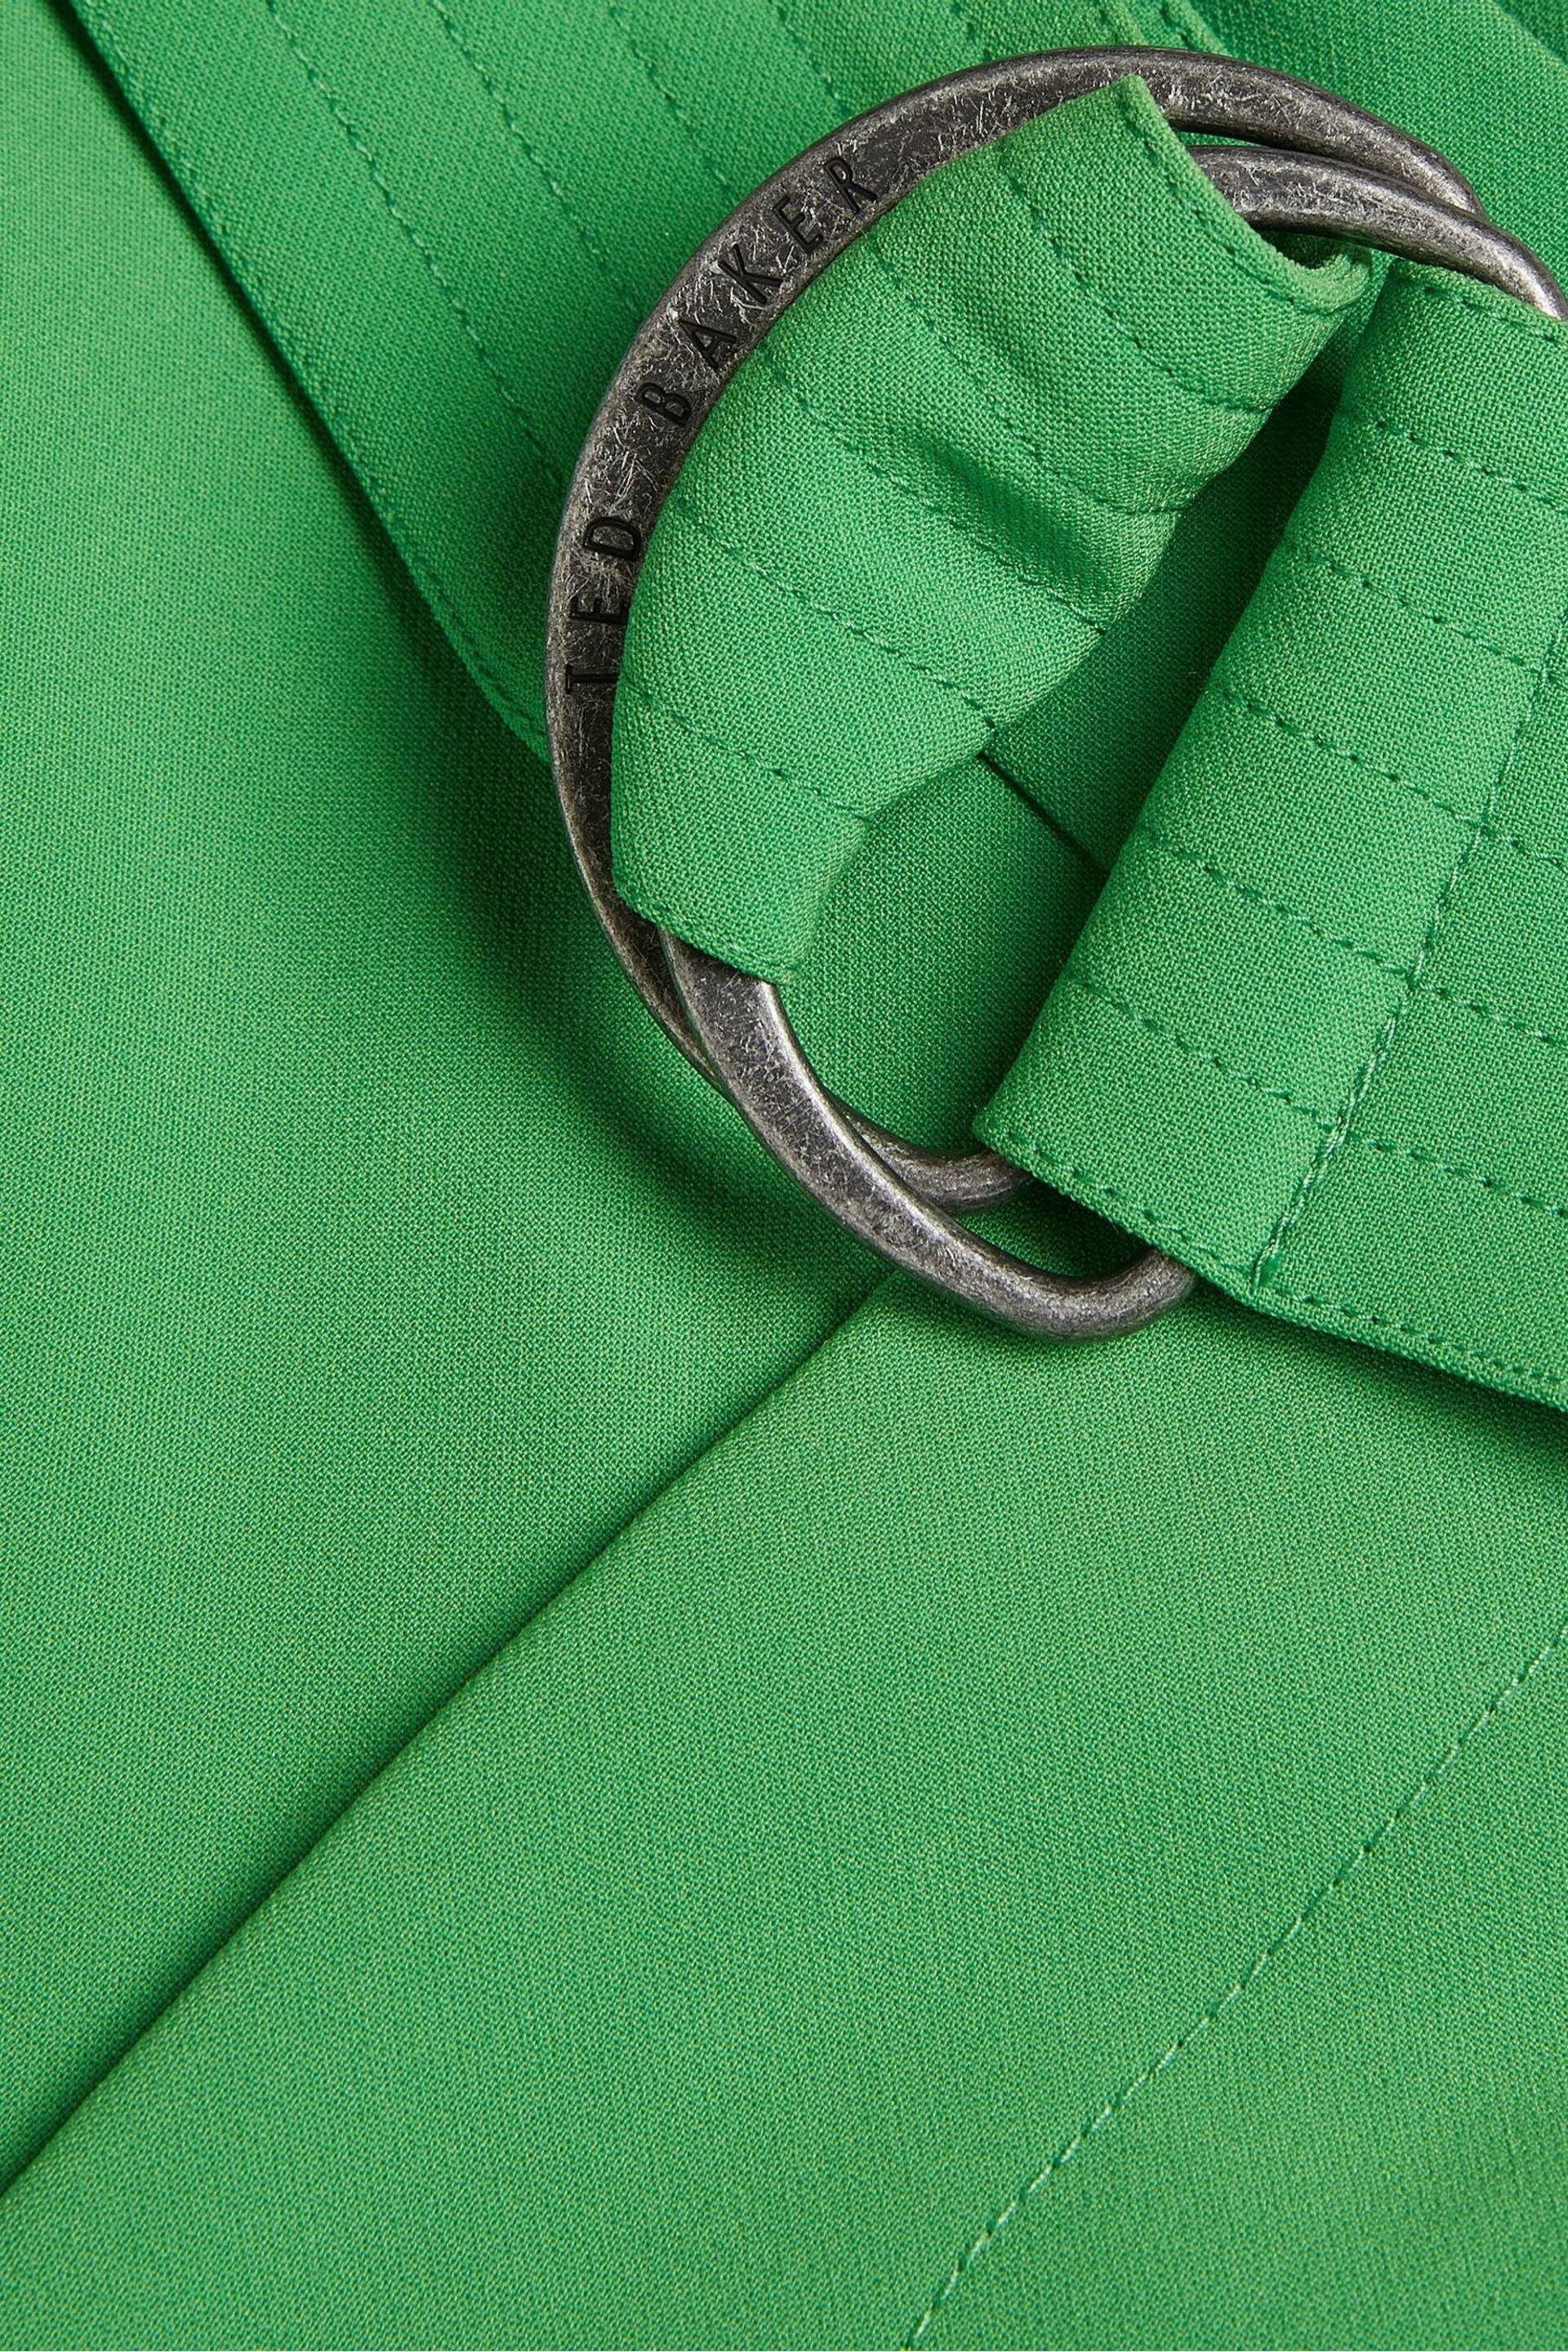 Ted Baker Green Gracieh High Waisted Belted Tapered Cargo Trousers - Image 4 of 5